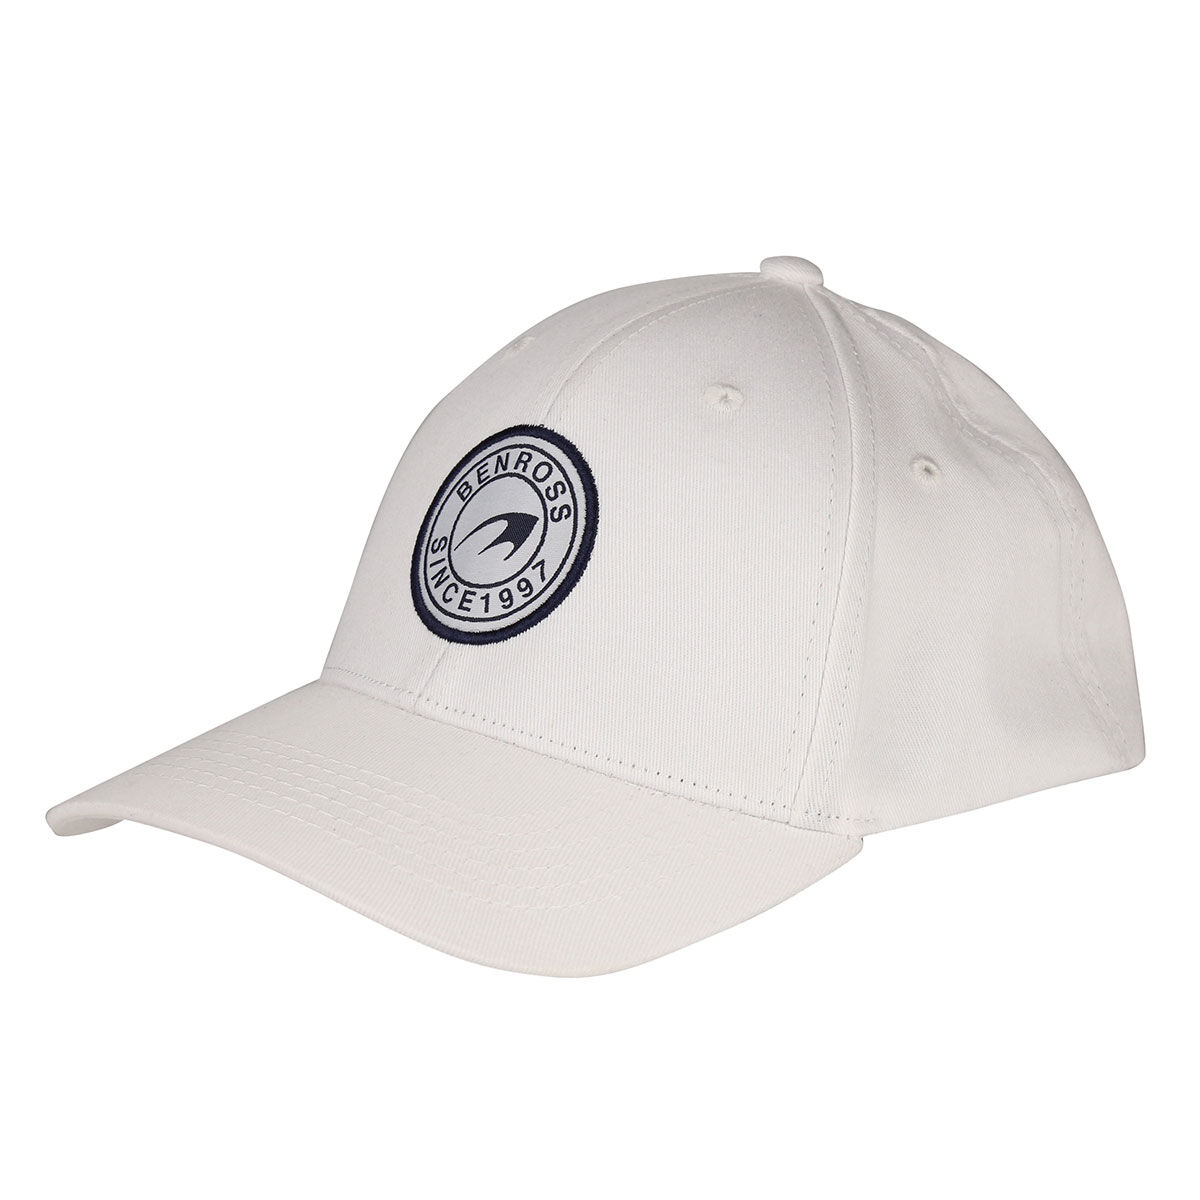 Benross Men’s White and Navy Blue Embroidered Established Patch Golf Cap | American Golf, One Size